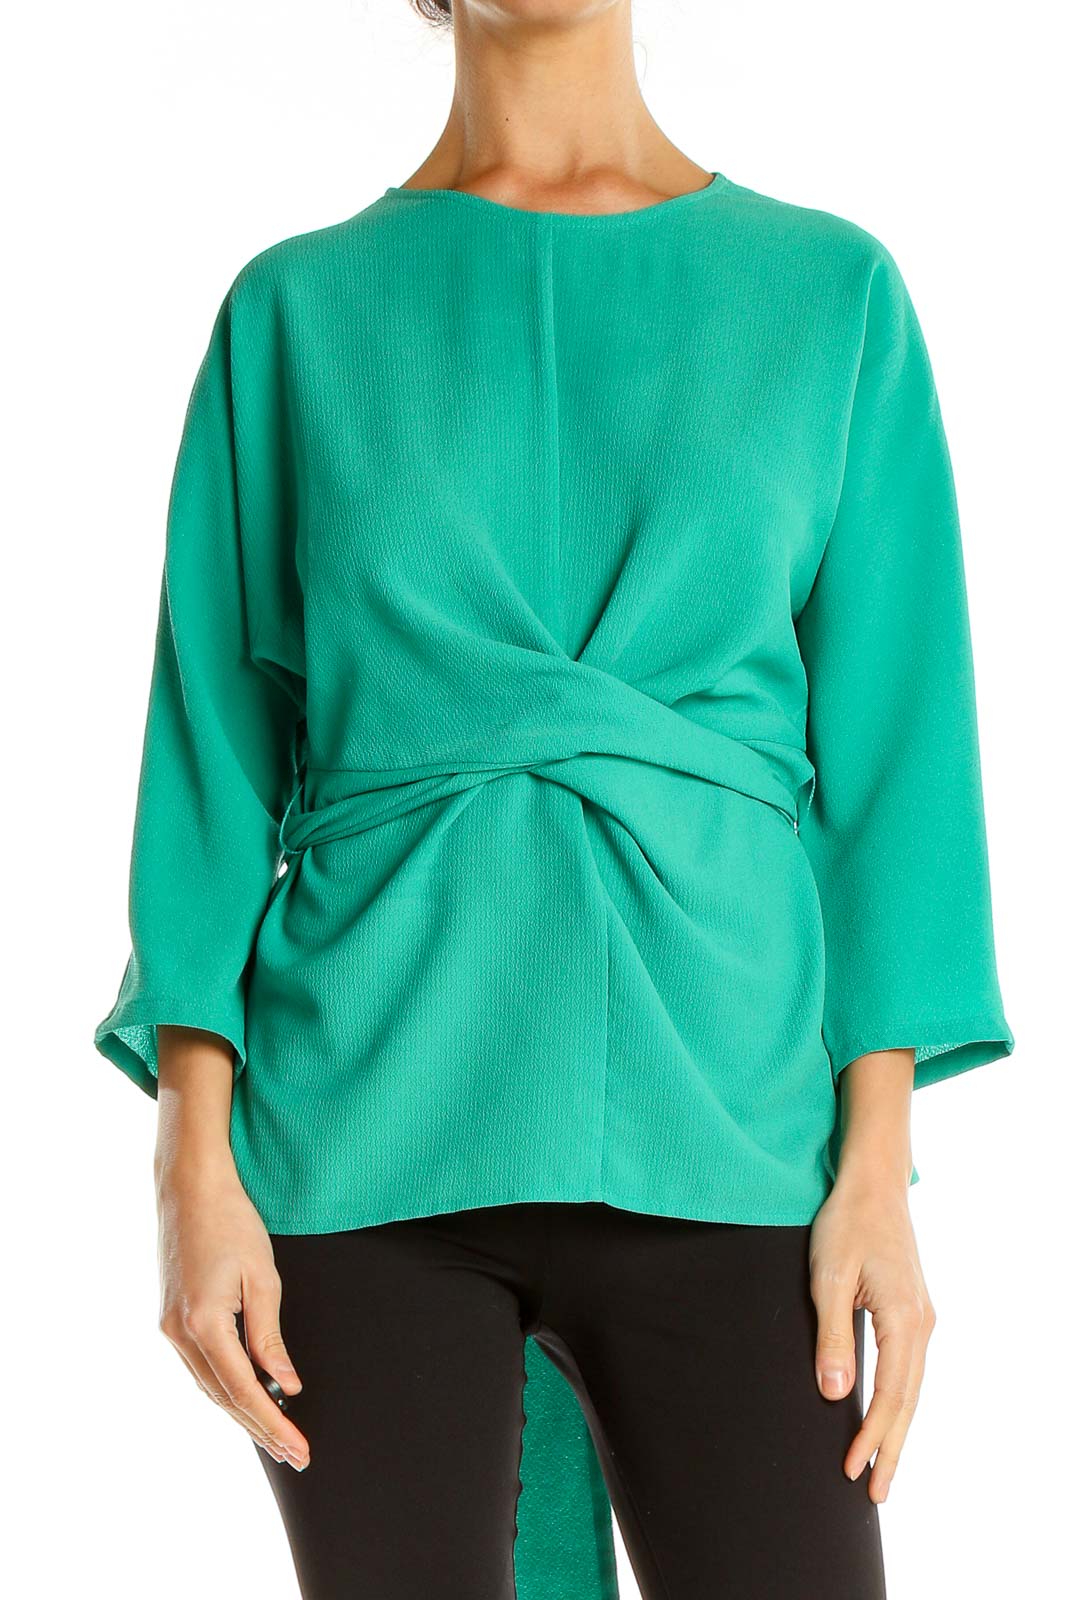 Green Chic Wrap Top Front